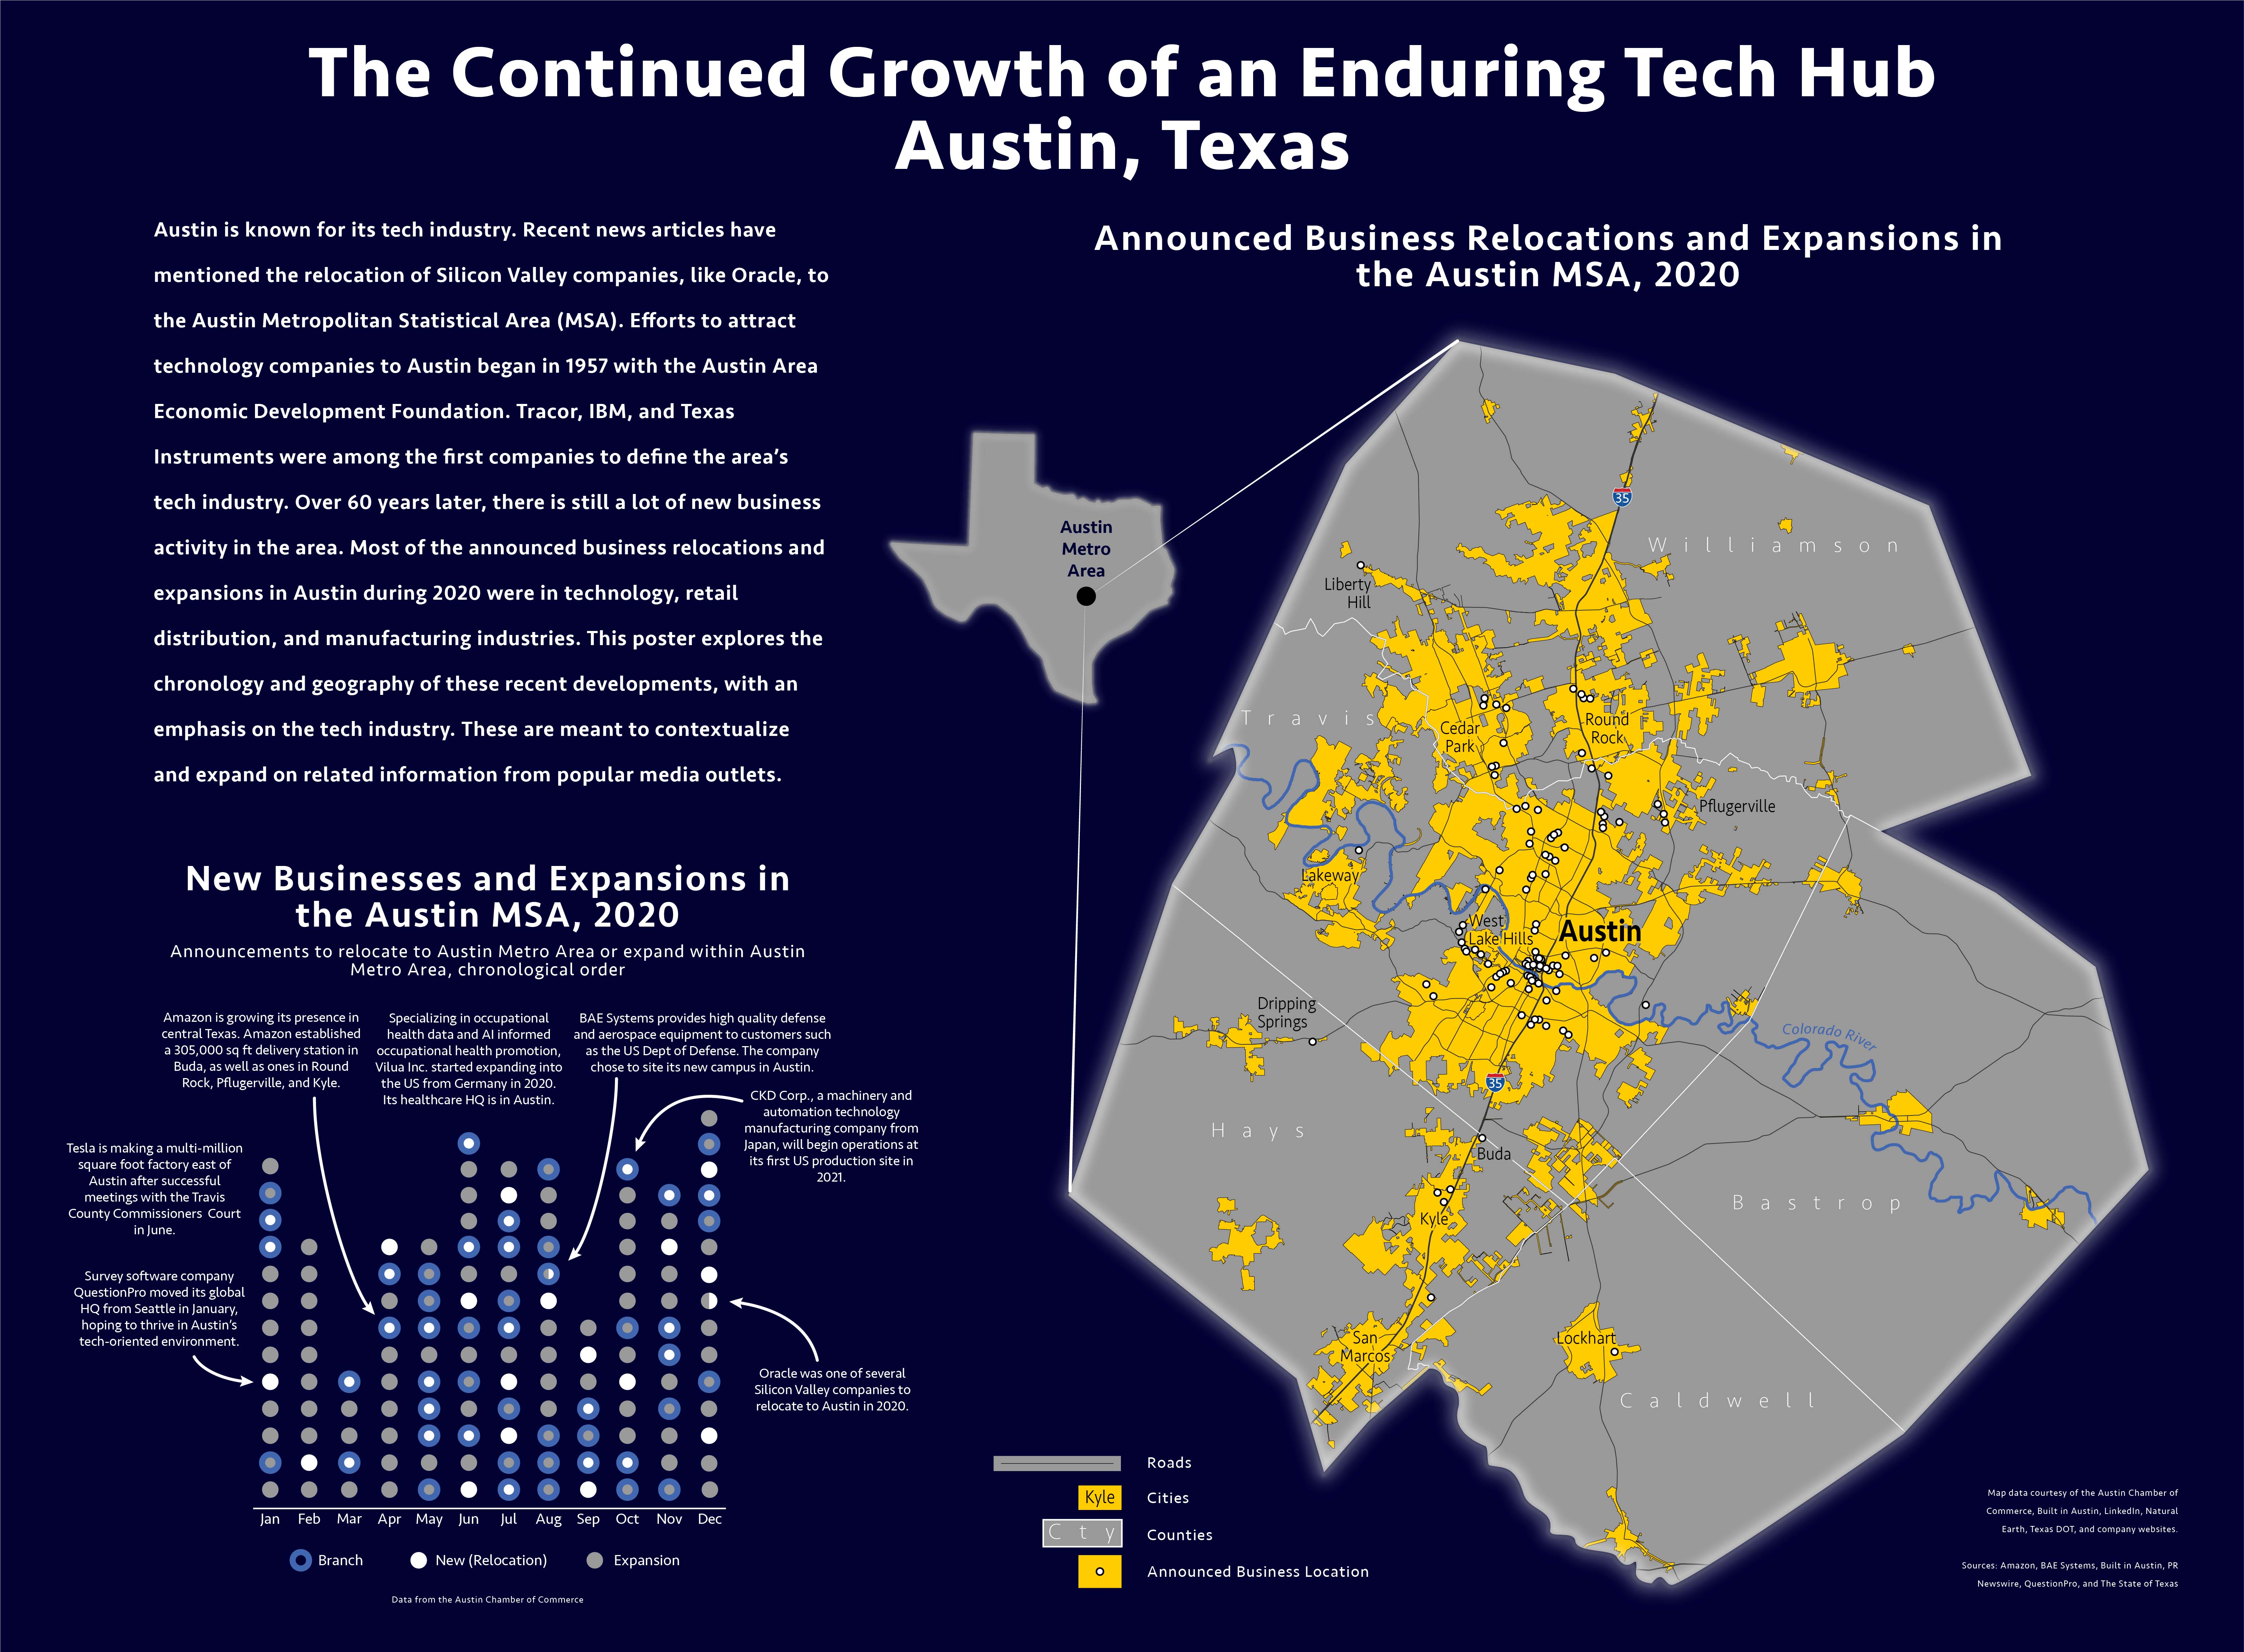 The Continued Growth of an Enduring Tech Hub